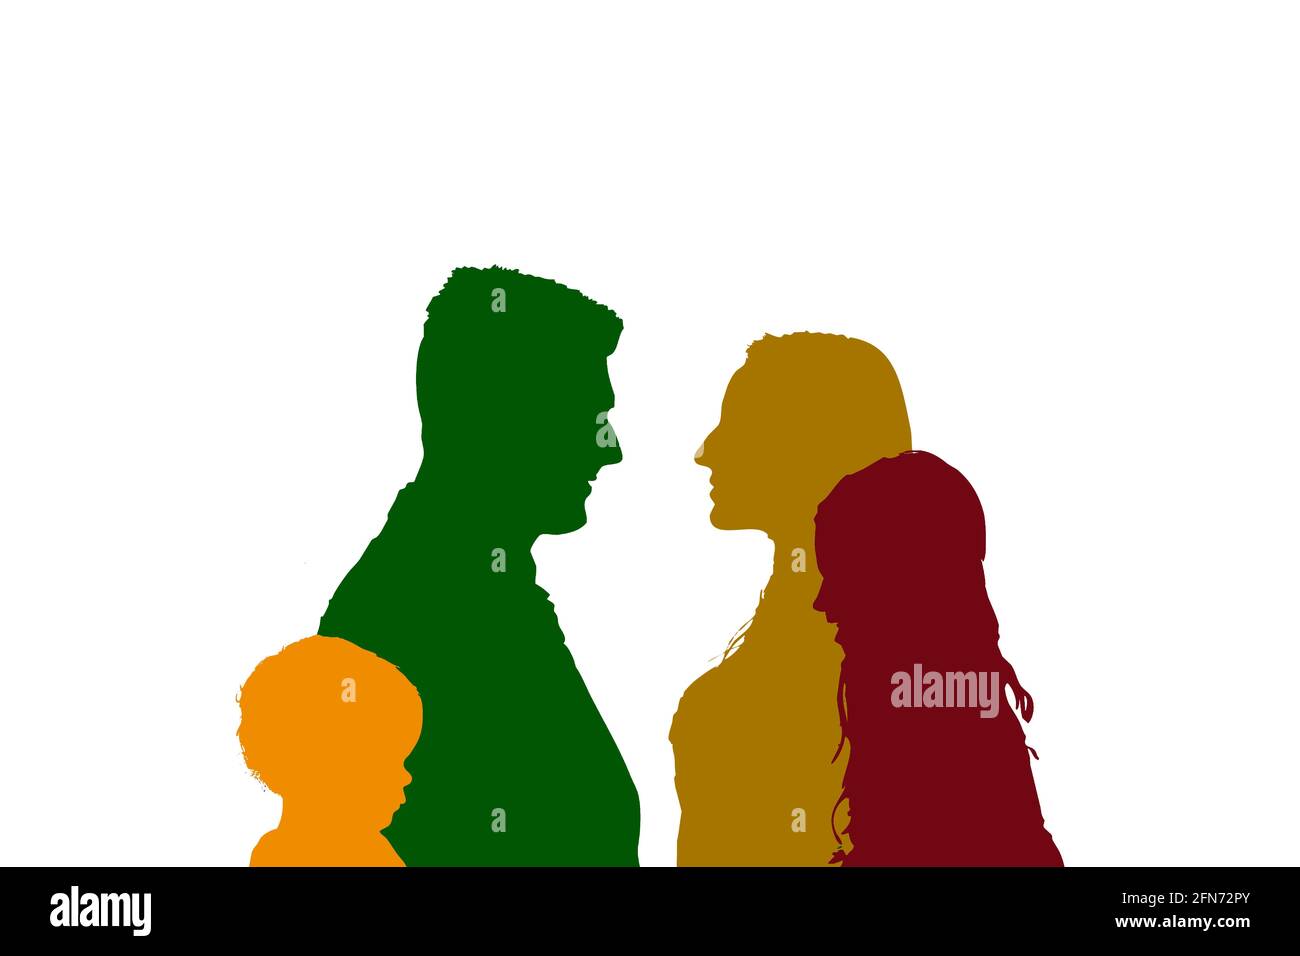 Silhouettes of family members. Parents and children. Caring, nurturing, upbringing of children. Peace. Love. Stock Photo